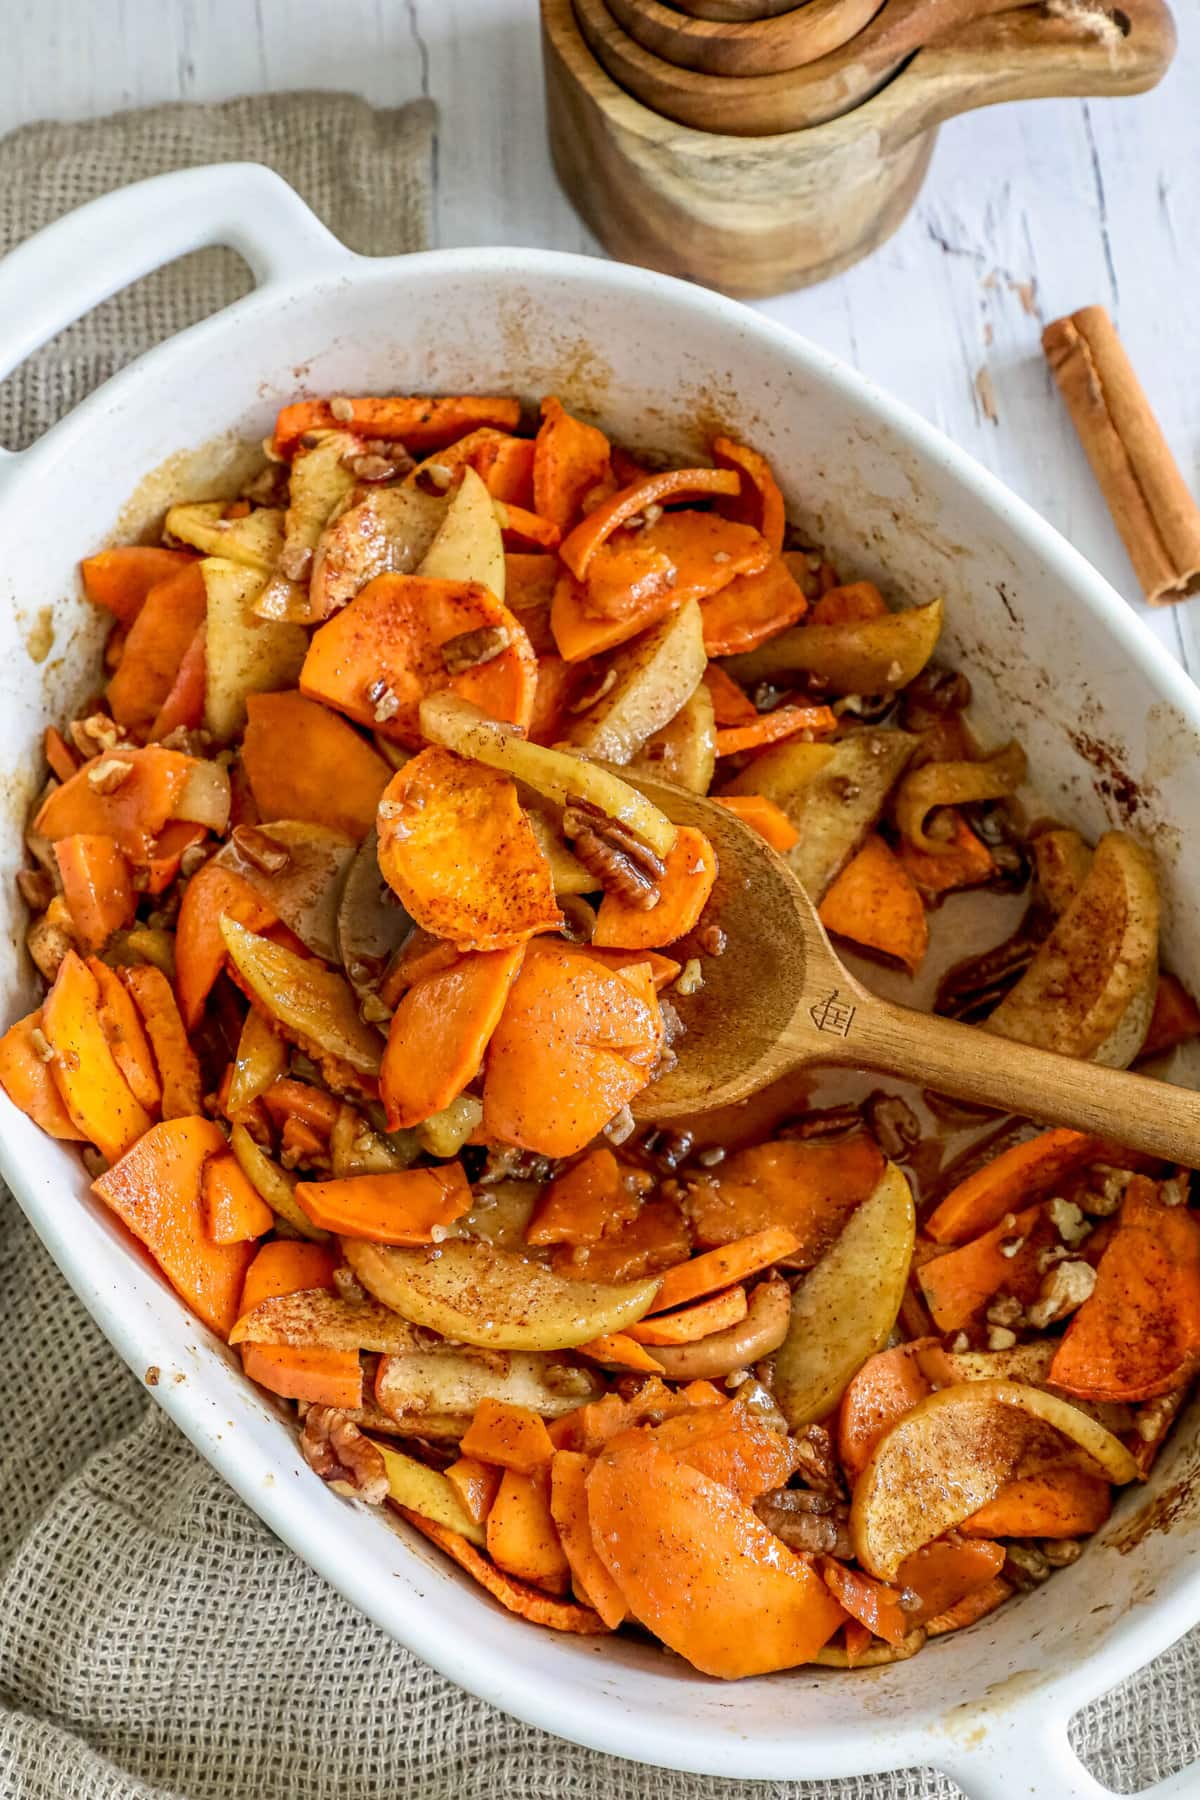 baked sweet potatoes and apples in a dish with cinnamon and nuts